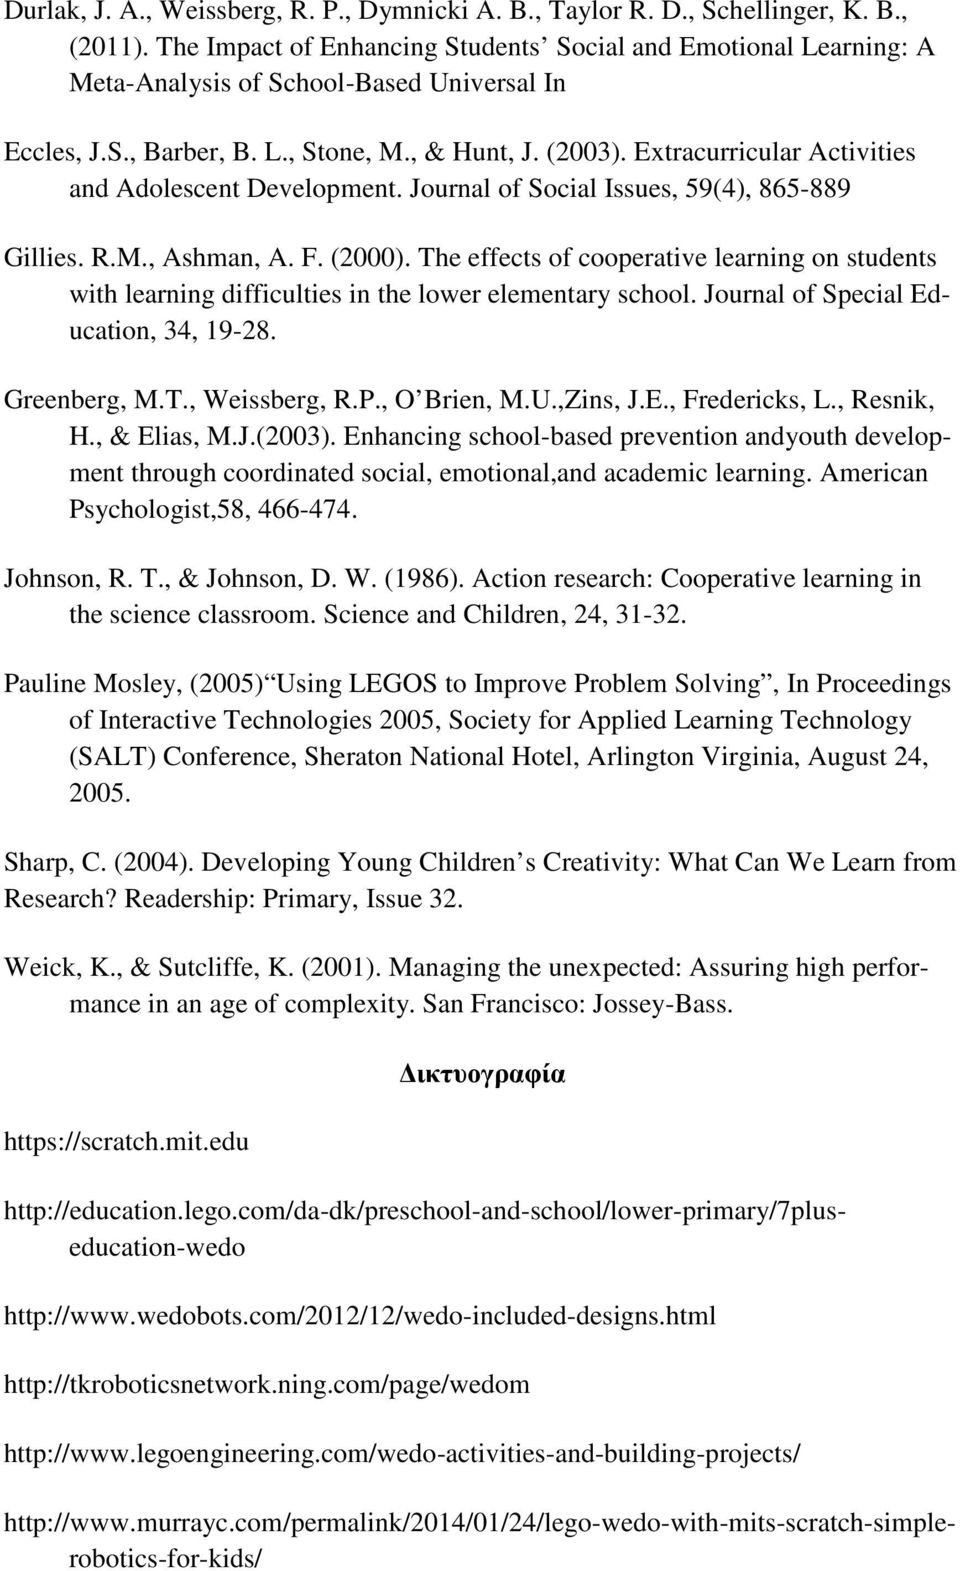 Extracurricular Activities and Adolescent Development. Journal of Social Issues, 59(4), 865-889 Gillies. R.M., Ashman, A. F. (2000).